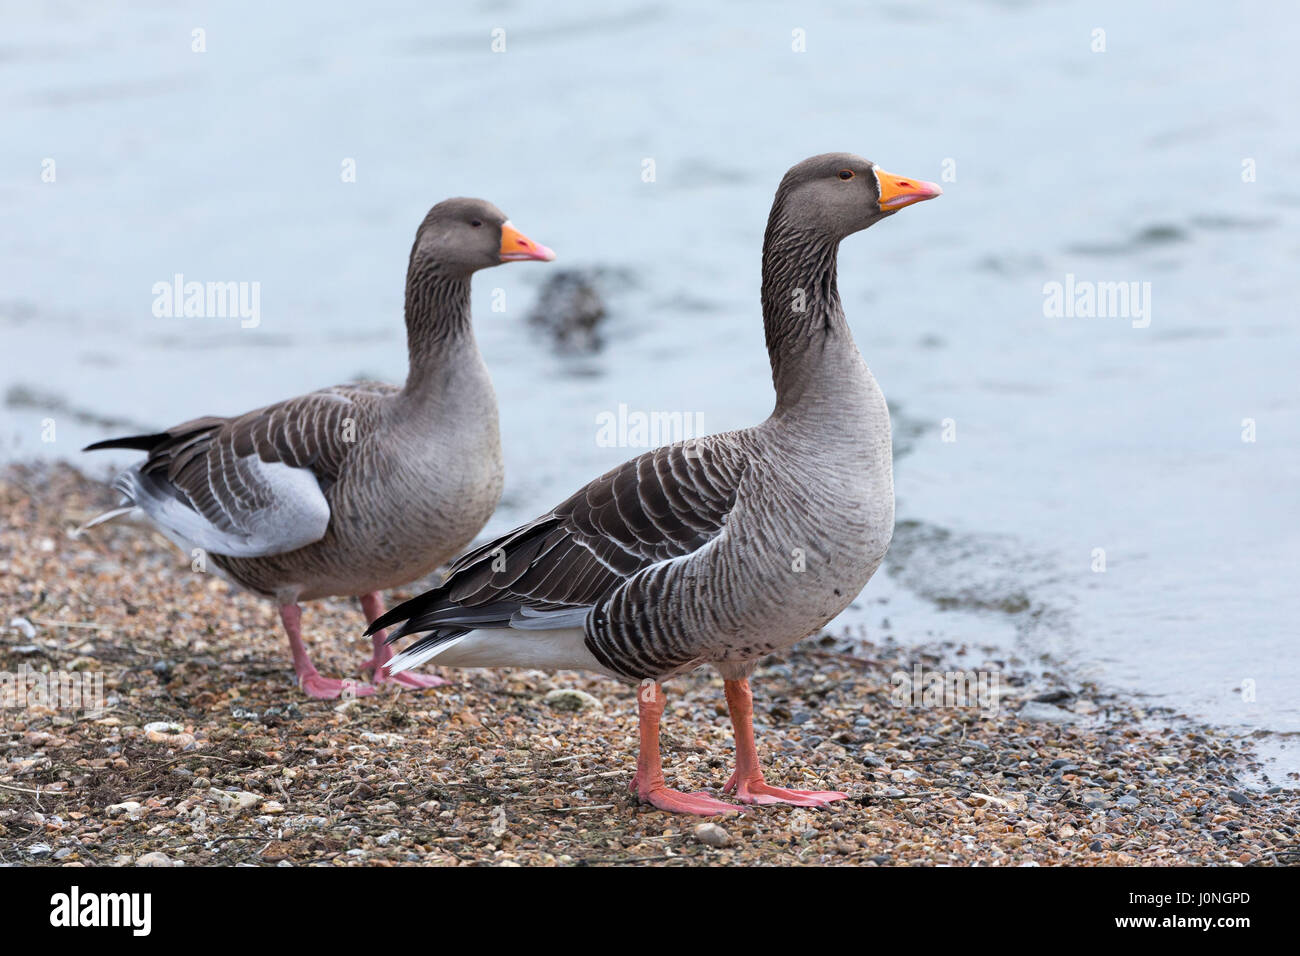 Greylags - Greylag Geese, Anser anser, on pebble beech by the shoreline in North Norfolk, UK Stock Photo